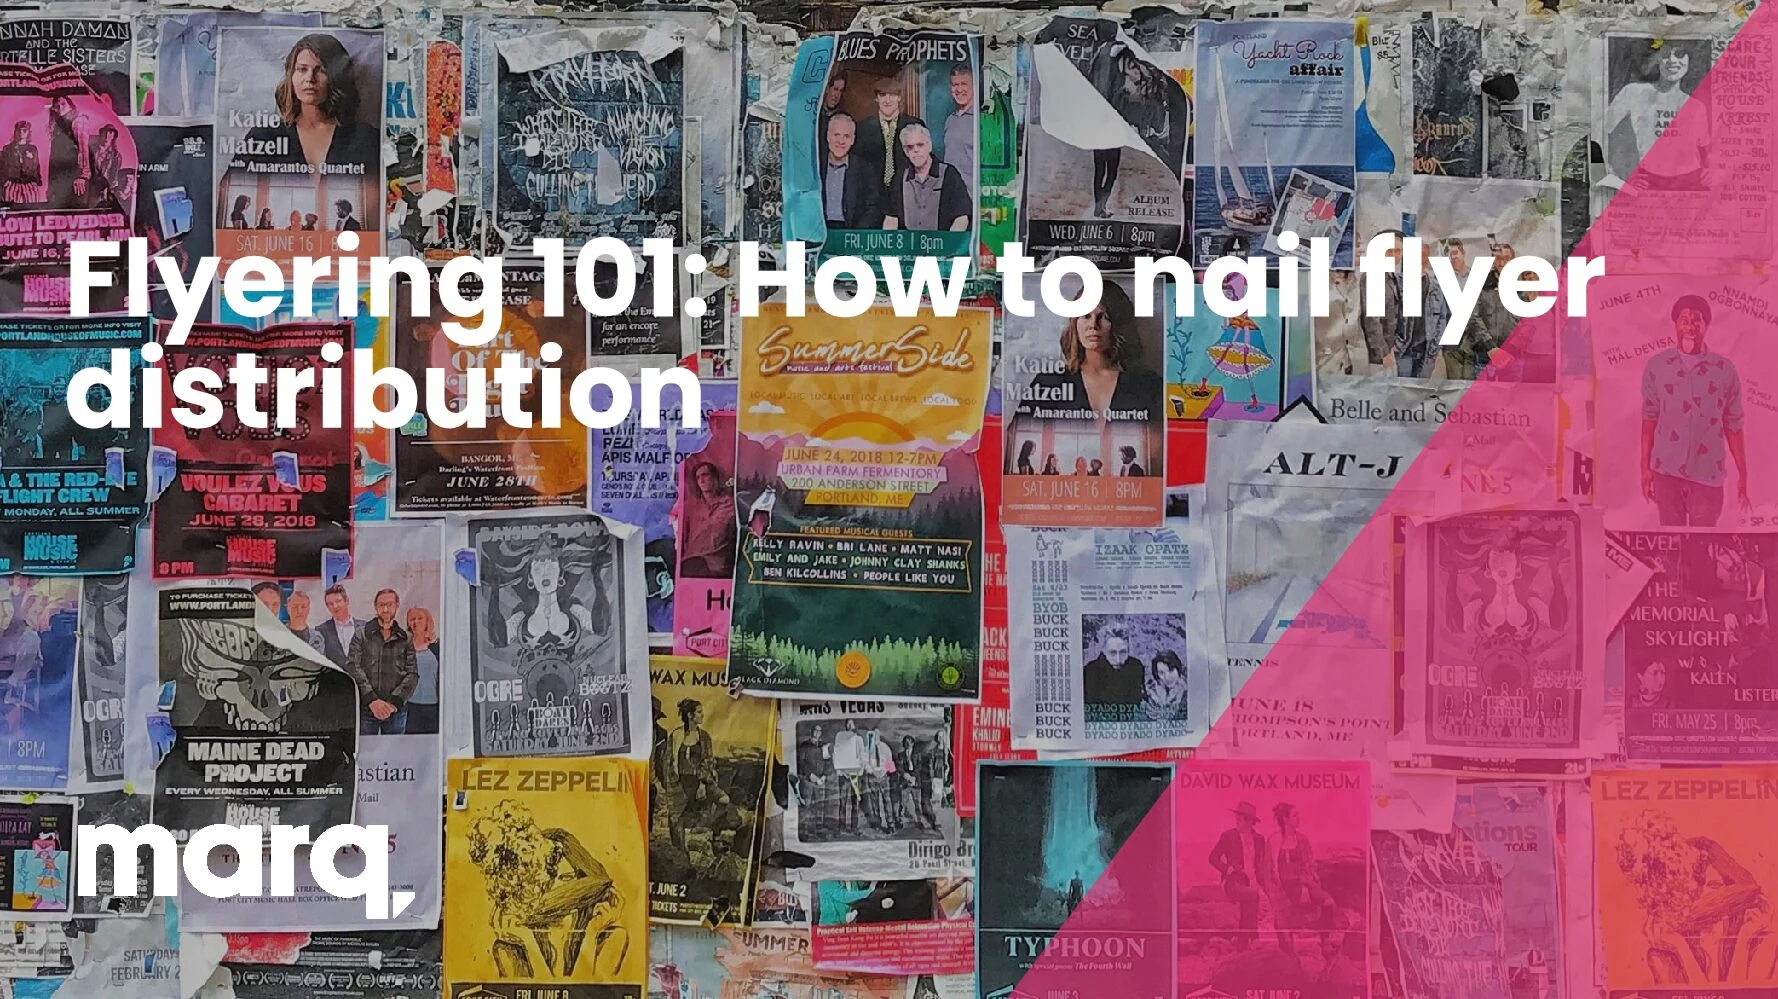 How to nail flyer distribution